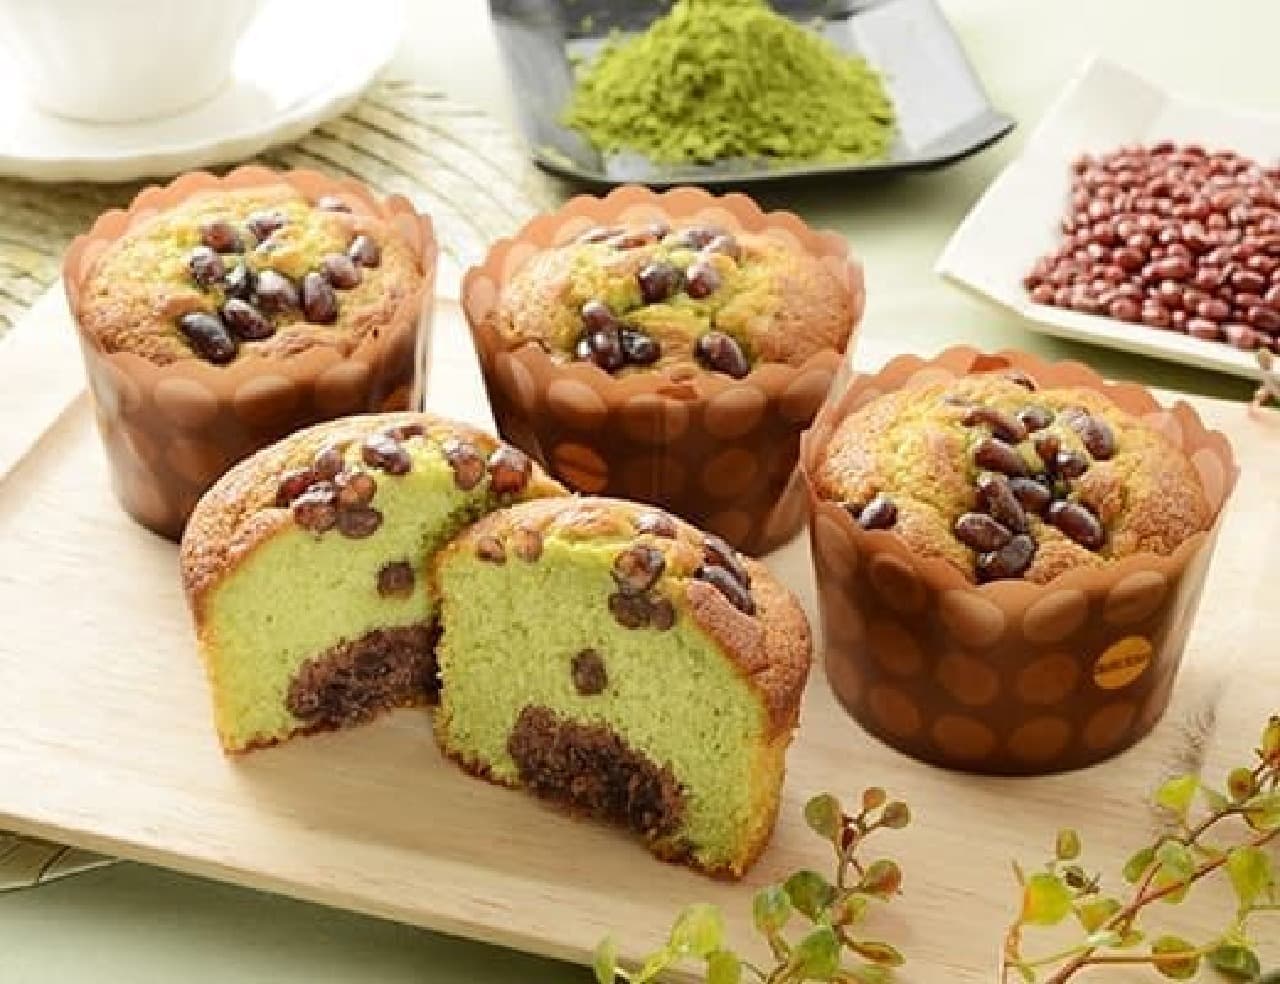 Lawson "Matcha and red bean muffins"